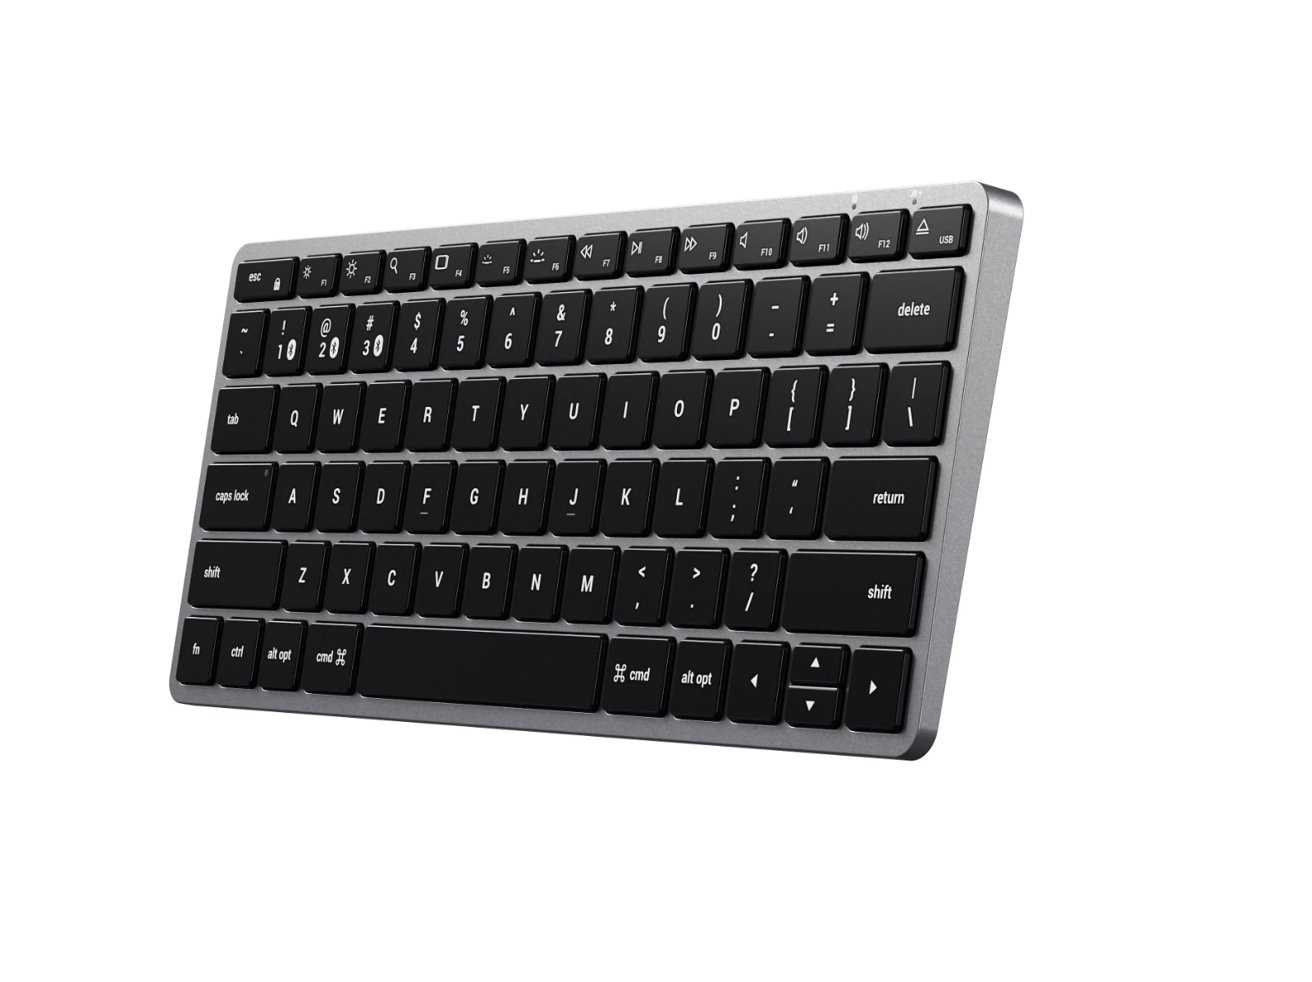 A wireless, compact, black and silver keyboard with modern design isolated on a white background.